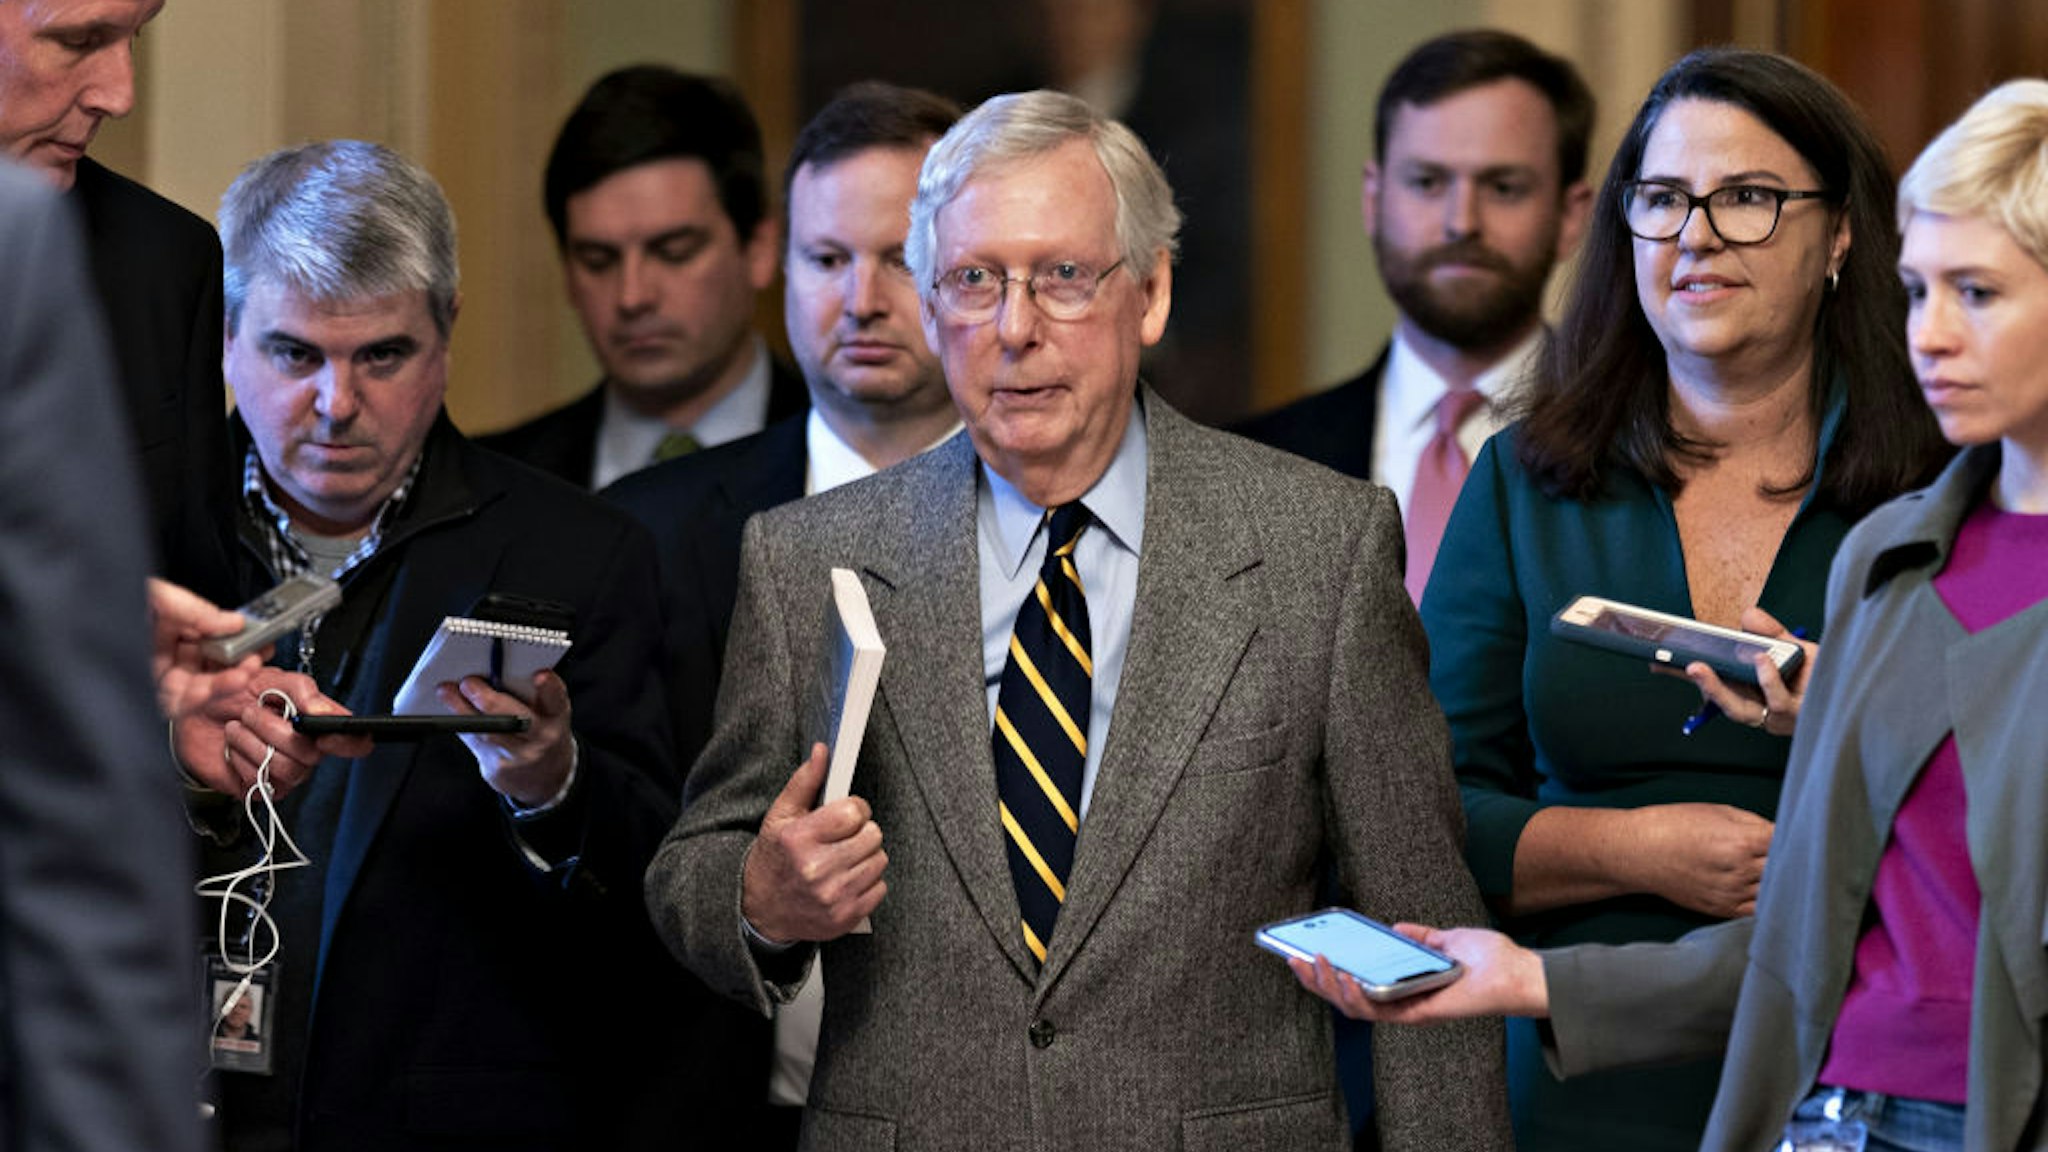 Senate Majority Leader Mitch McConnell, a Republican from Kentucky, center, walks to his office after speaking on the Senate floor at the U.S. Capitol in Washington, D.C., U.S., on Friday, Jan. 3, 2020. McConnell and House Speaker Nancy Pelosi are locked in a stare-down over the terms of President Donald Trump's impeachment trial, which carries political risks for both sides if it continues deeper into January.